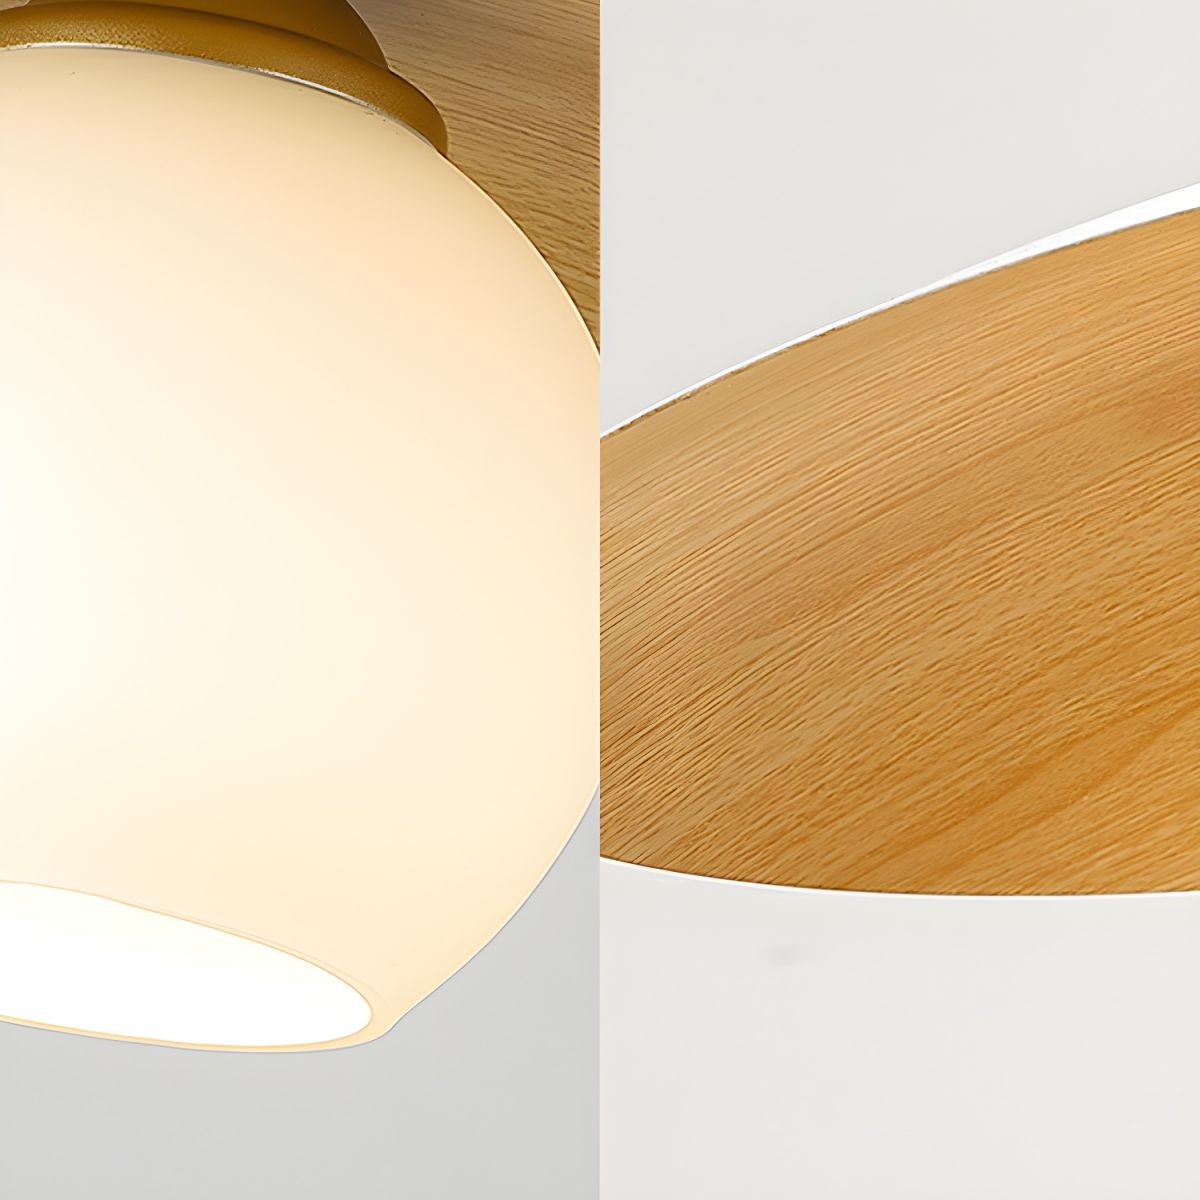 Modern Simple Minimalist Chinese Style Ceiling Lights -Homwarmy